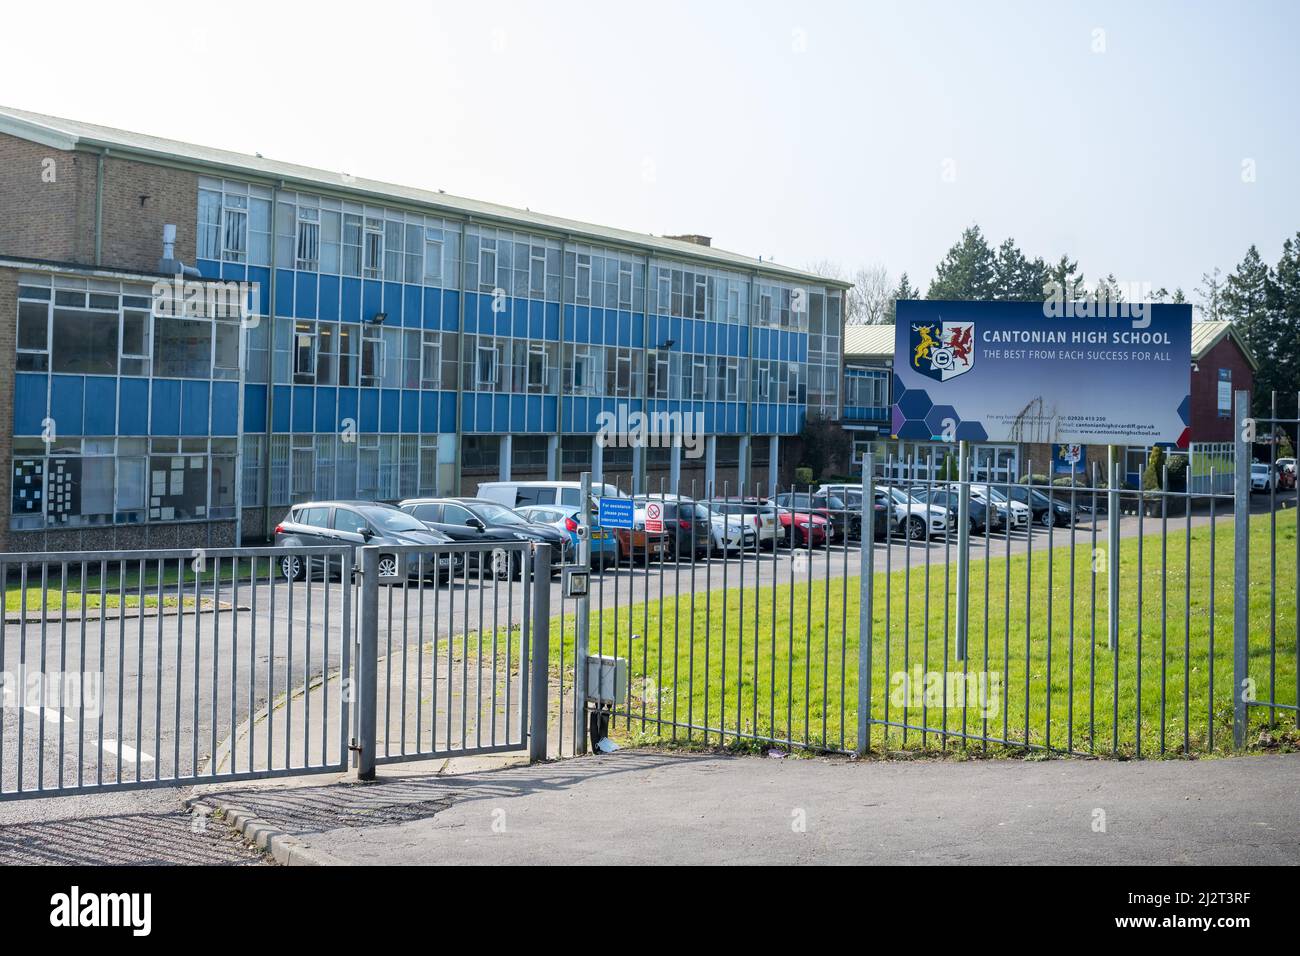 An exterior view of Cantonian High School in Cardiff, Wales, United Kingdom. Stock Photo